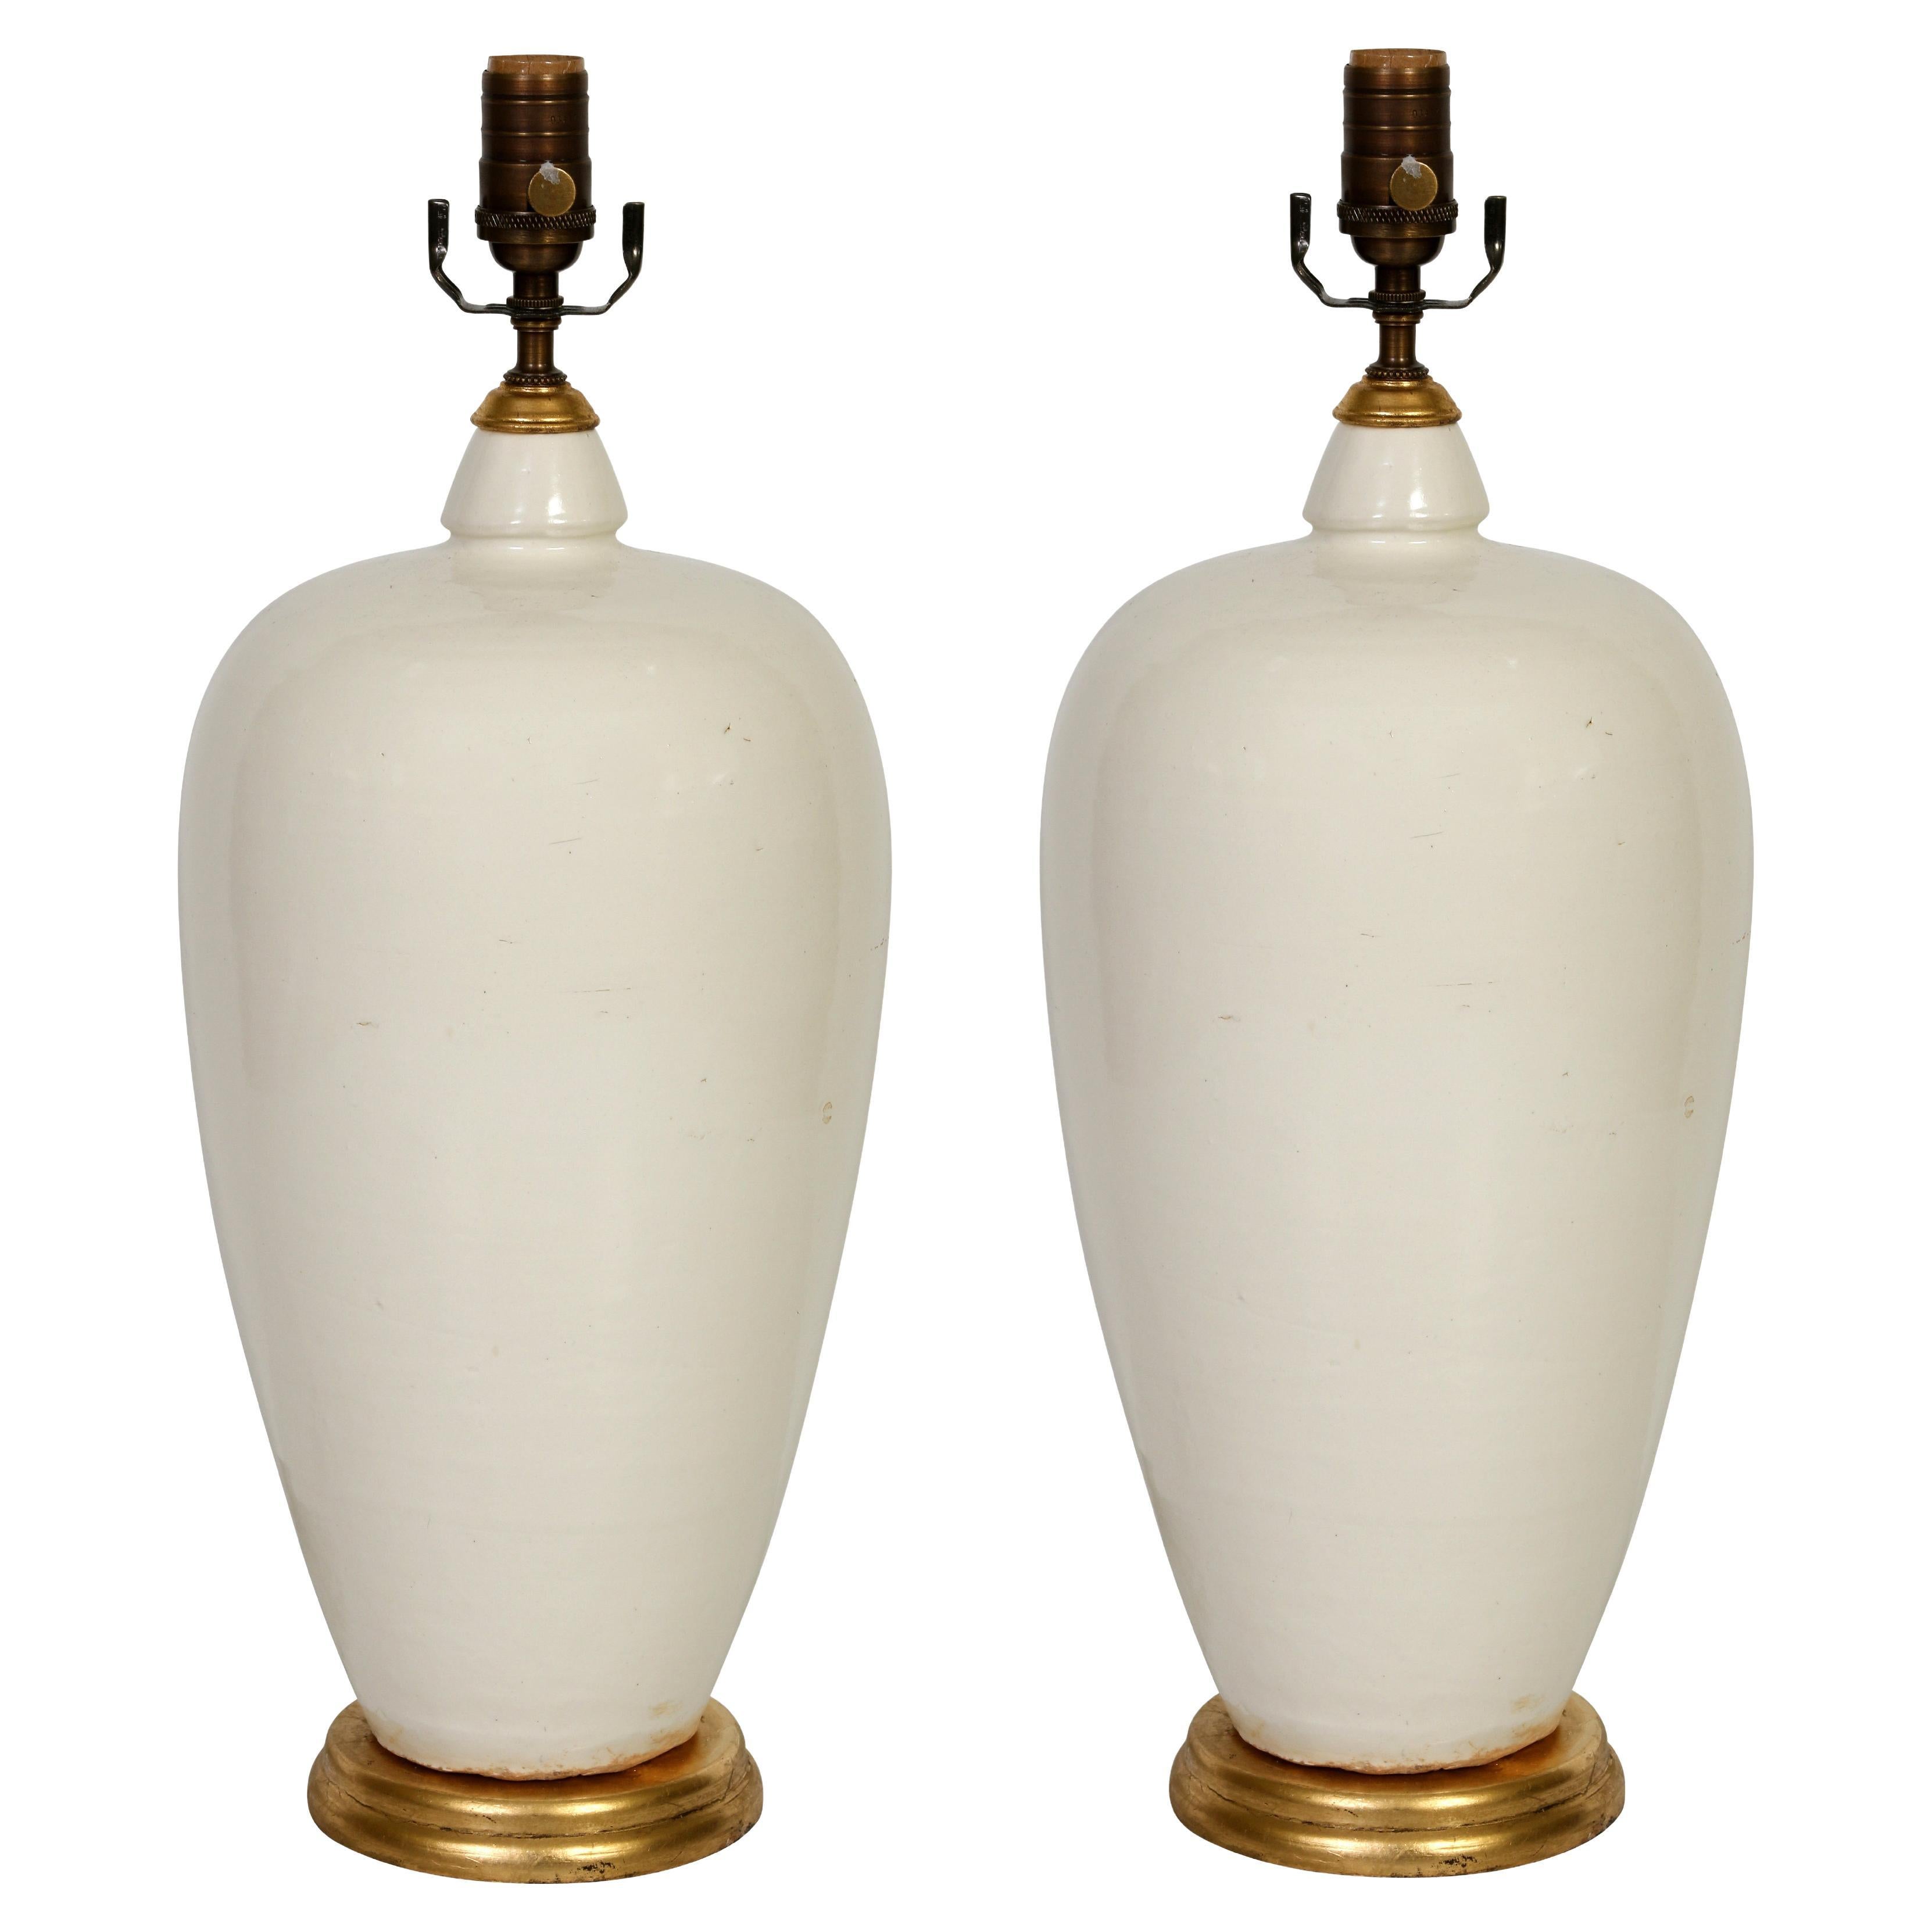 Pair of White Ceramic Lamps with Gold Base